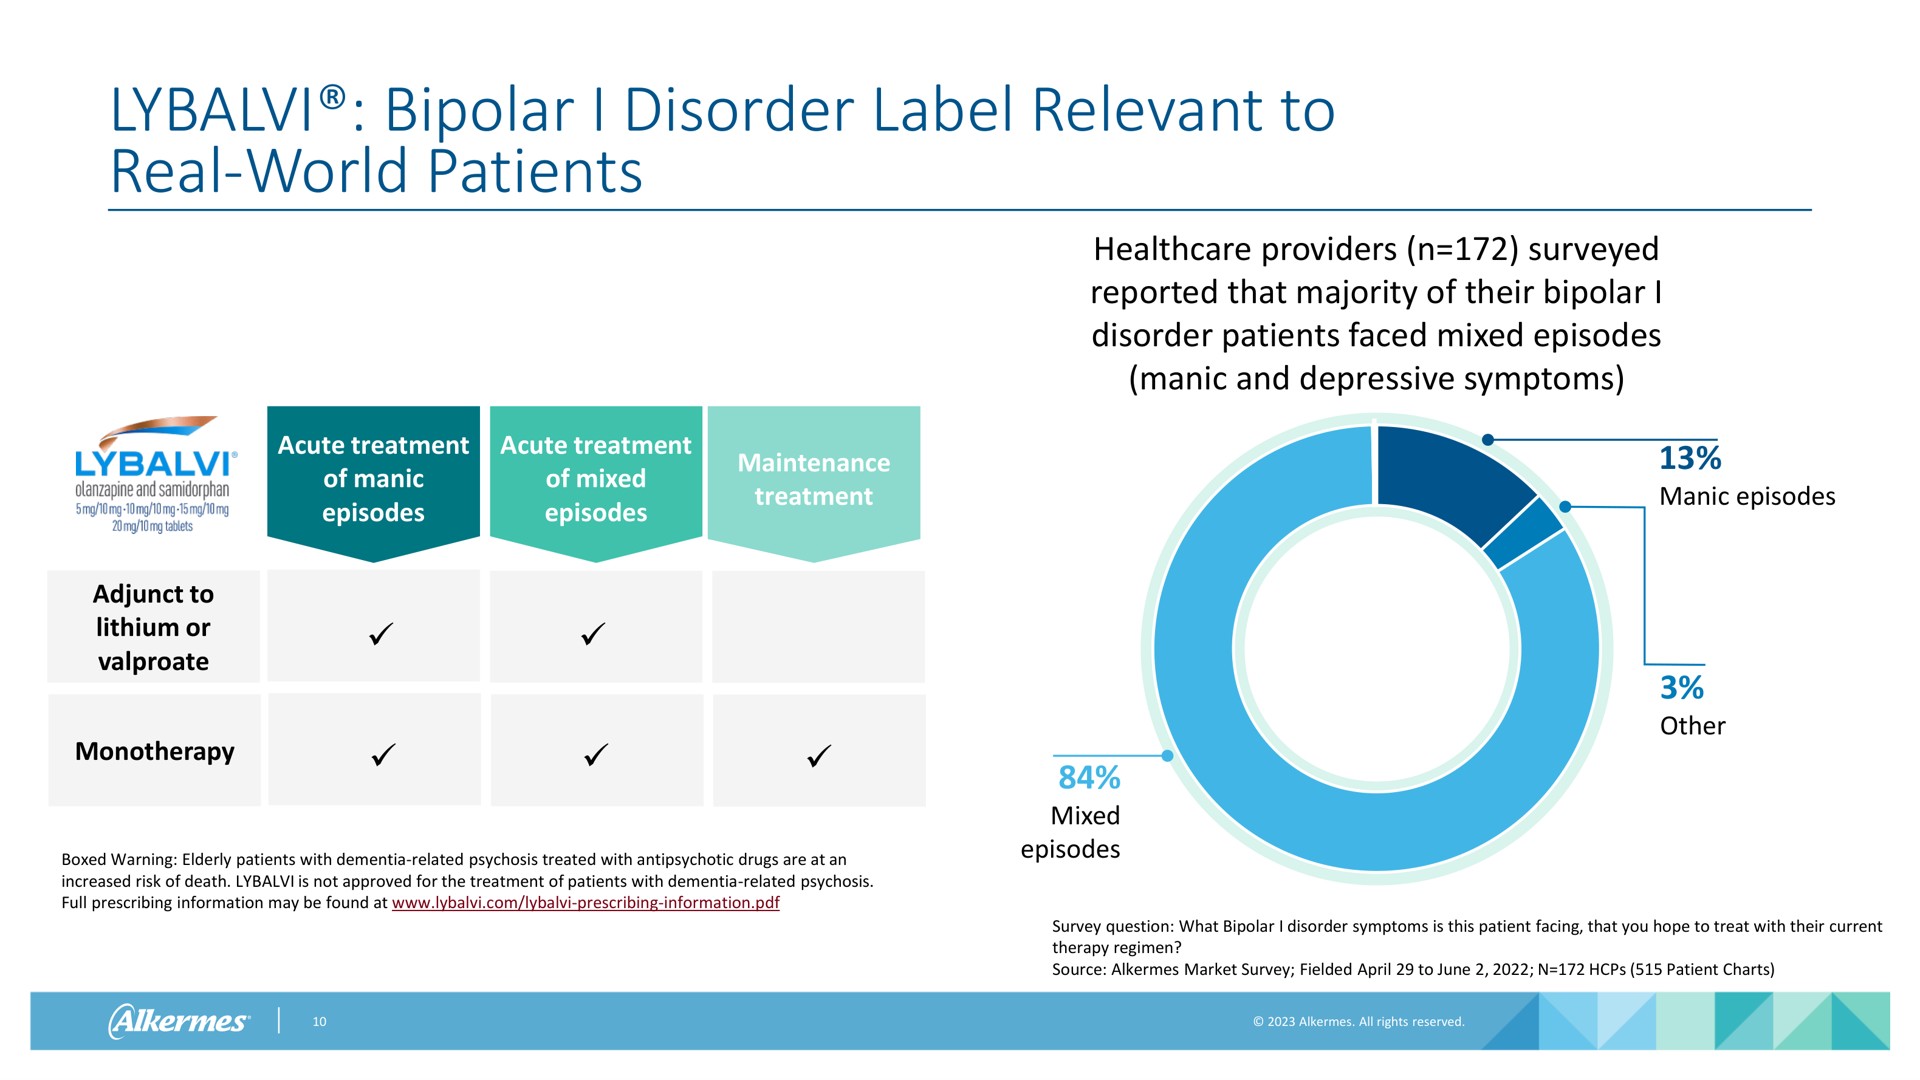 bipolar i disorder label relevant to real world patients | Alkermes